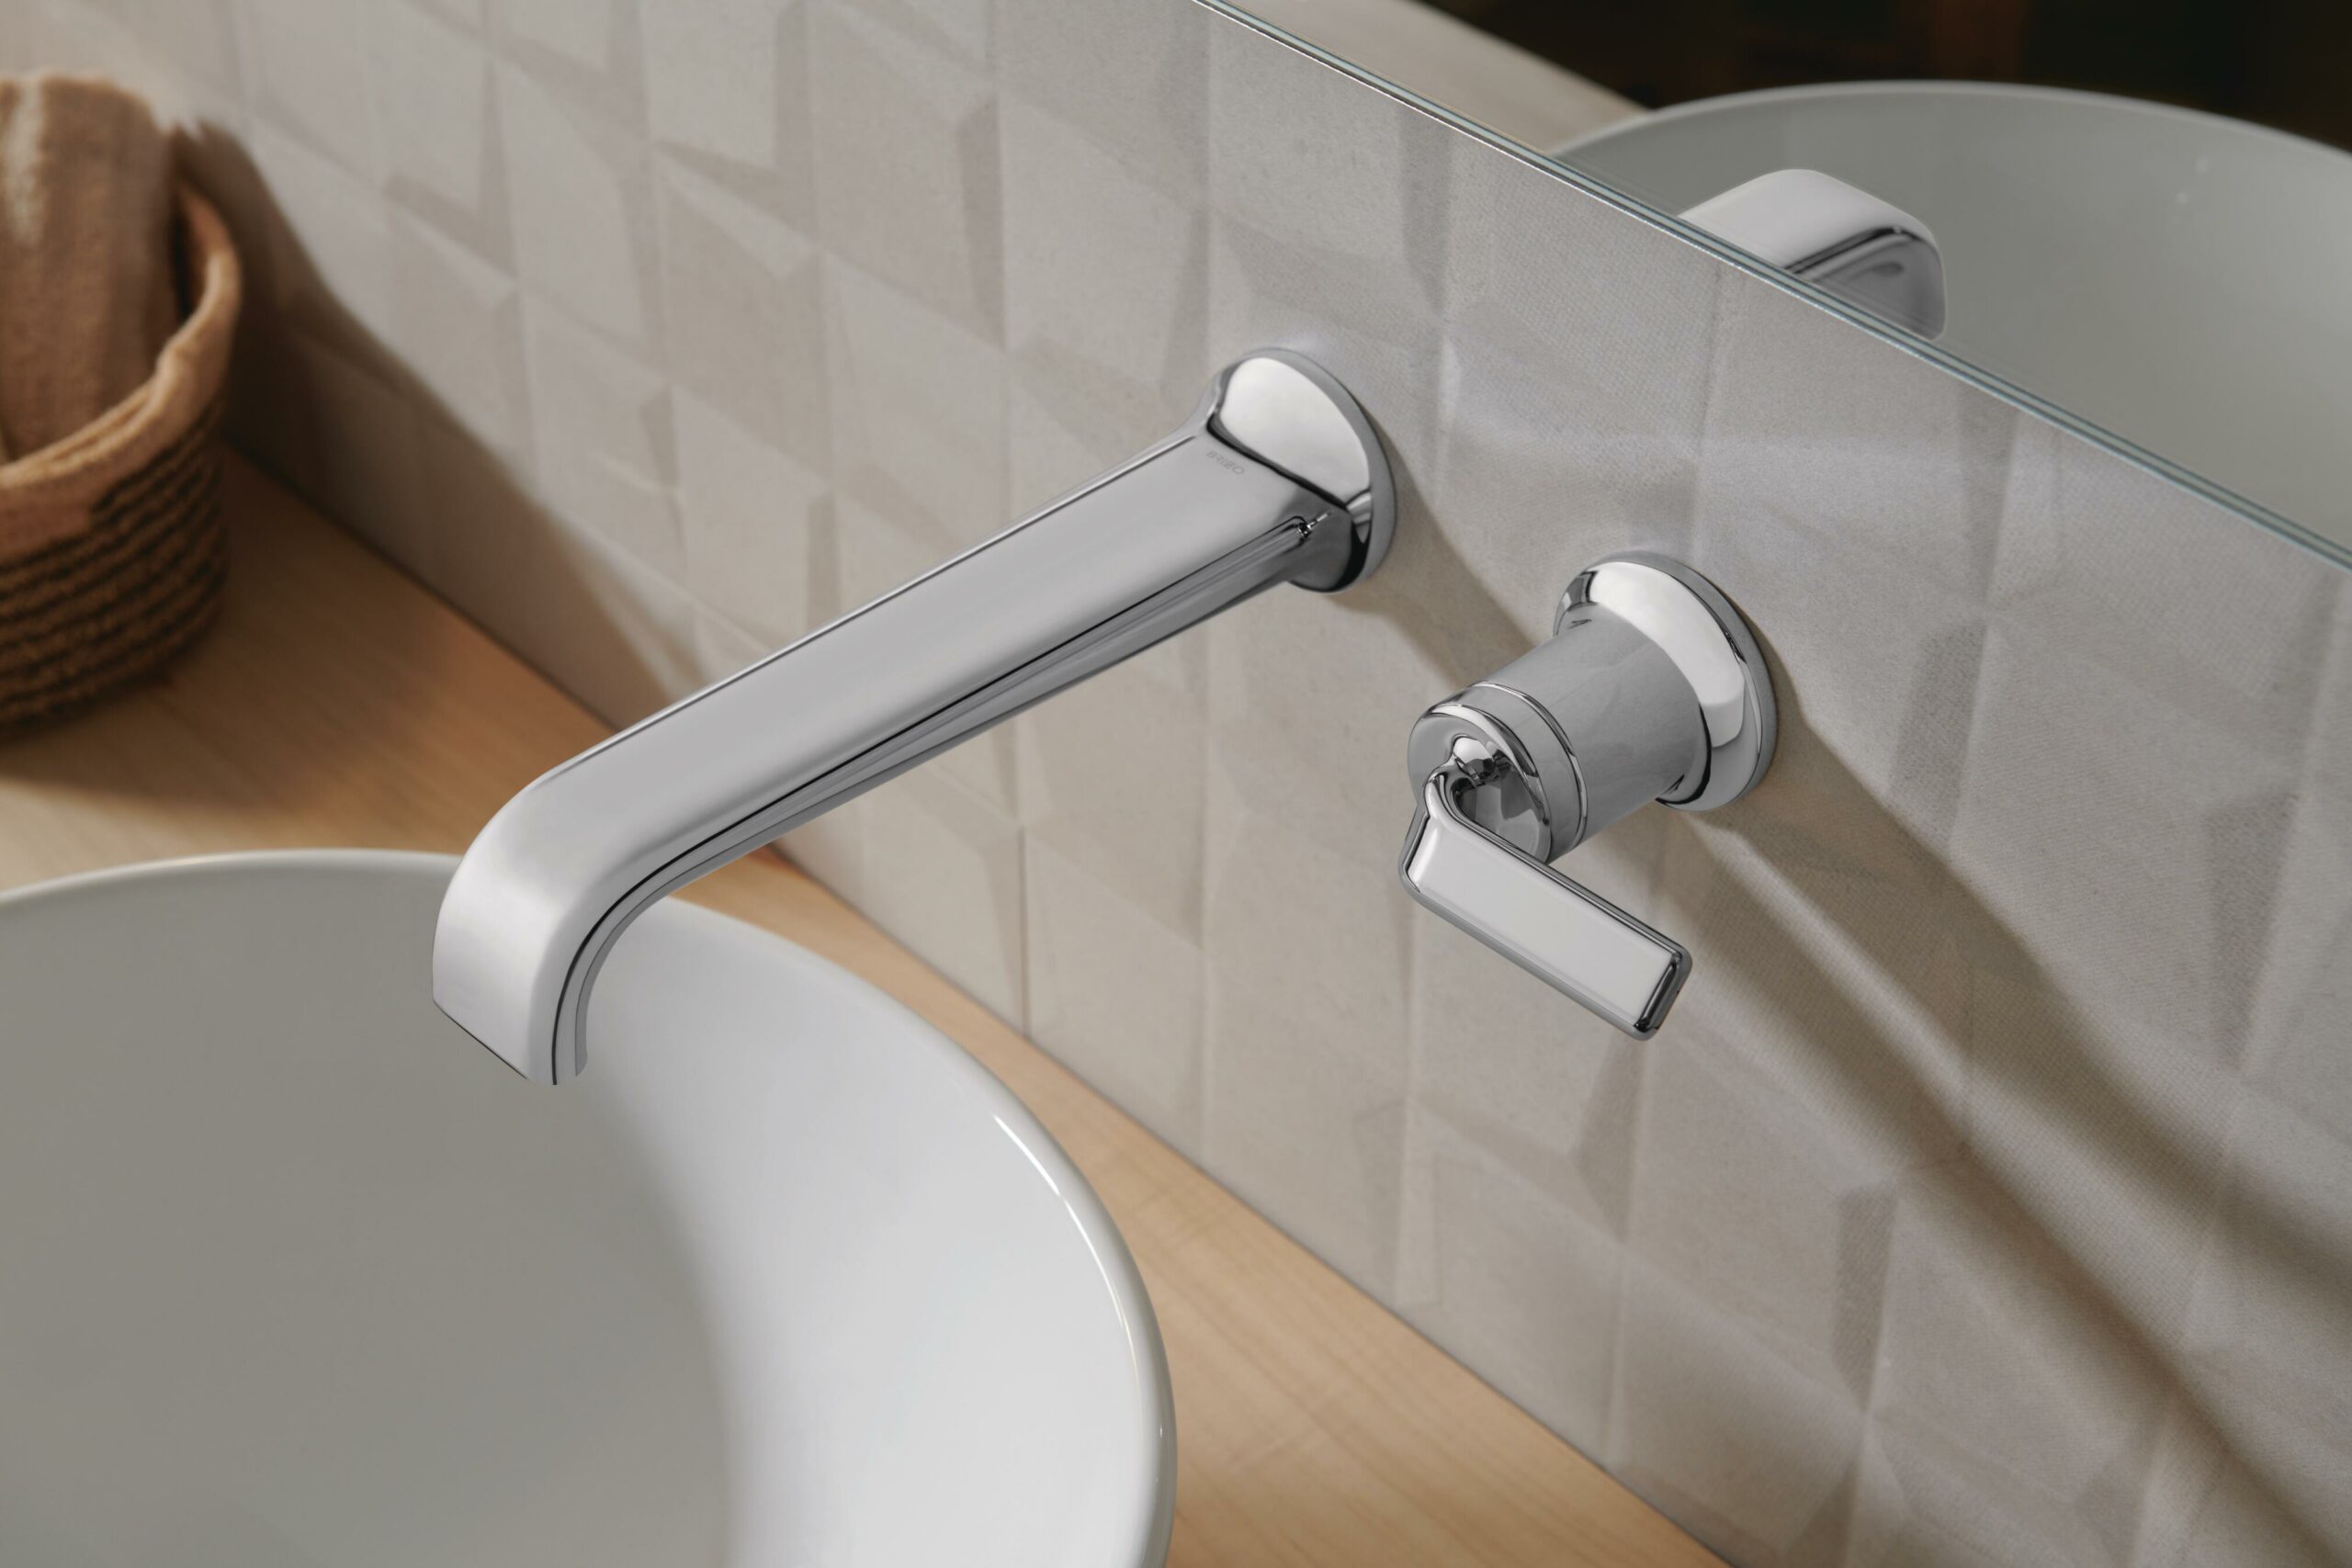 Very simple curved faucet design from Brizo